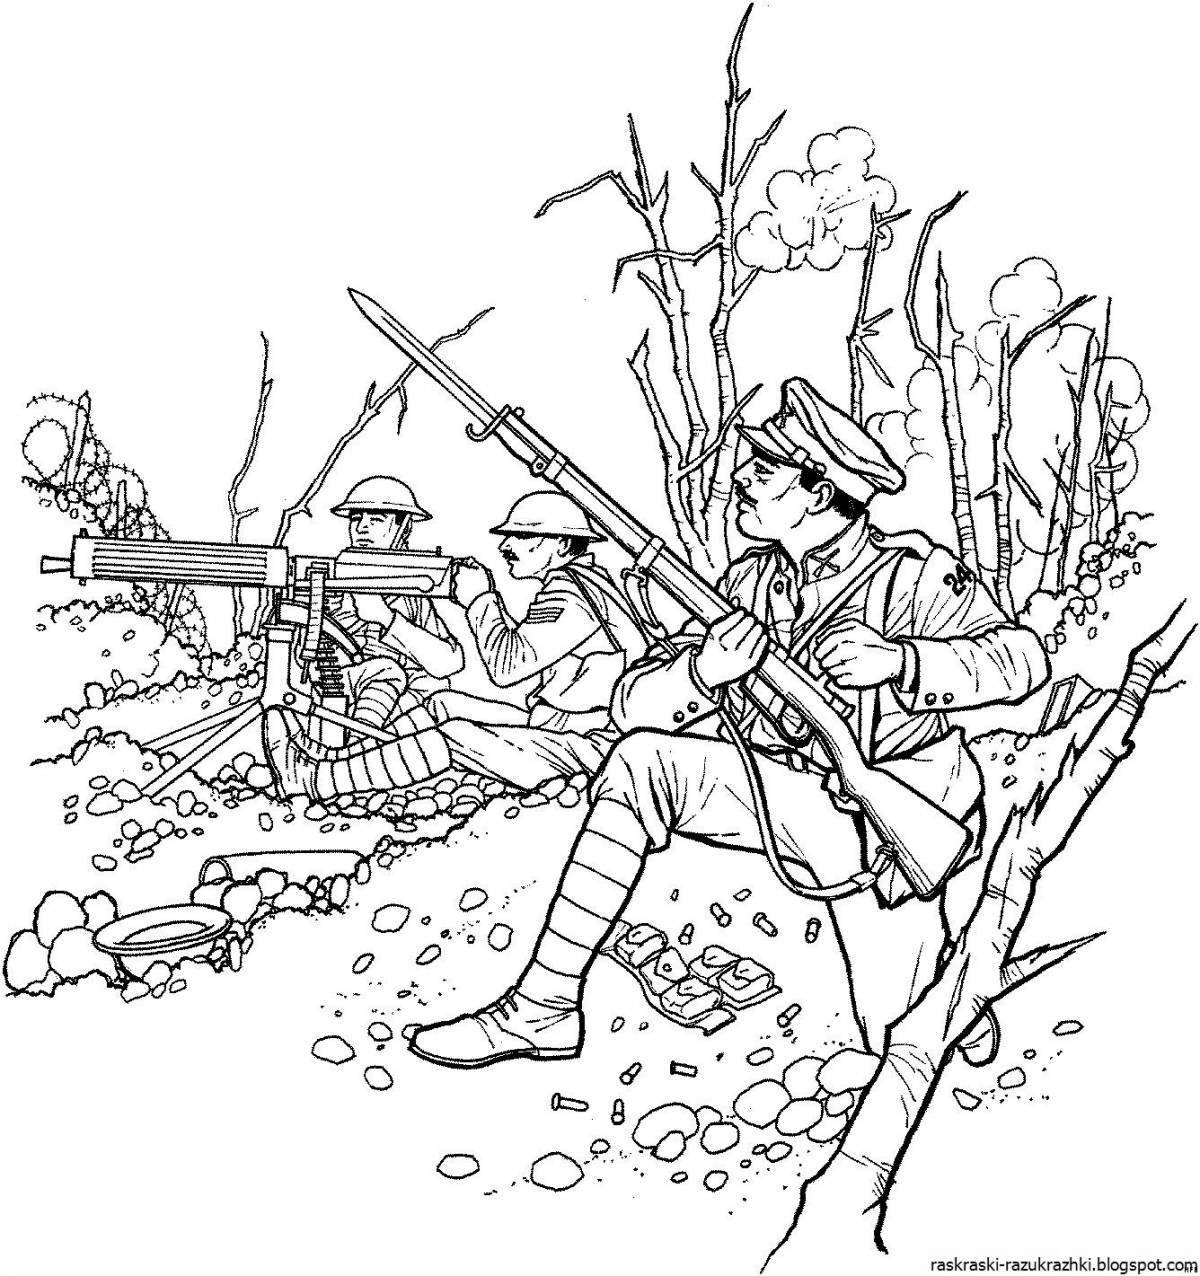 Coloring book brave soldiers in the war